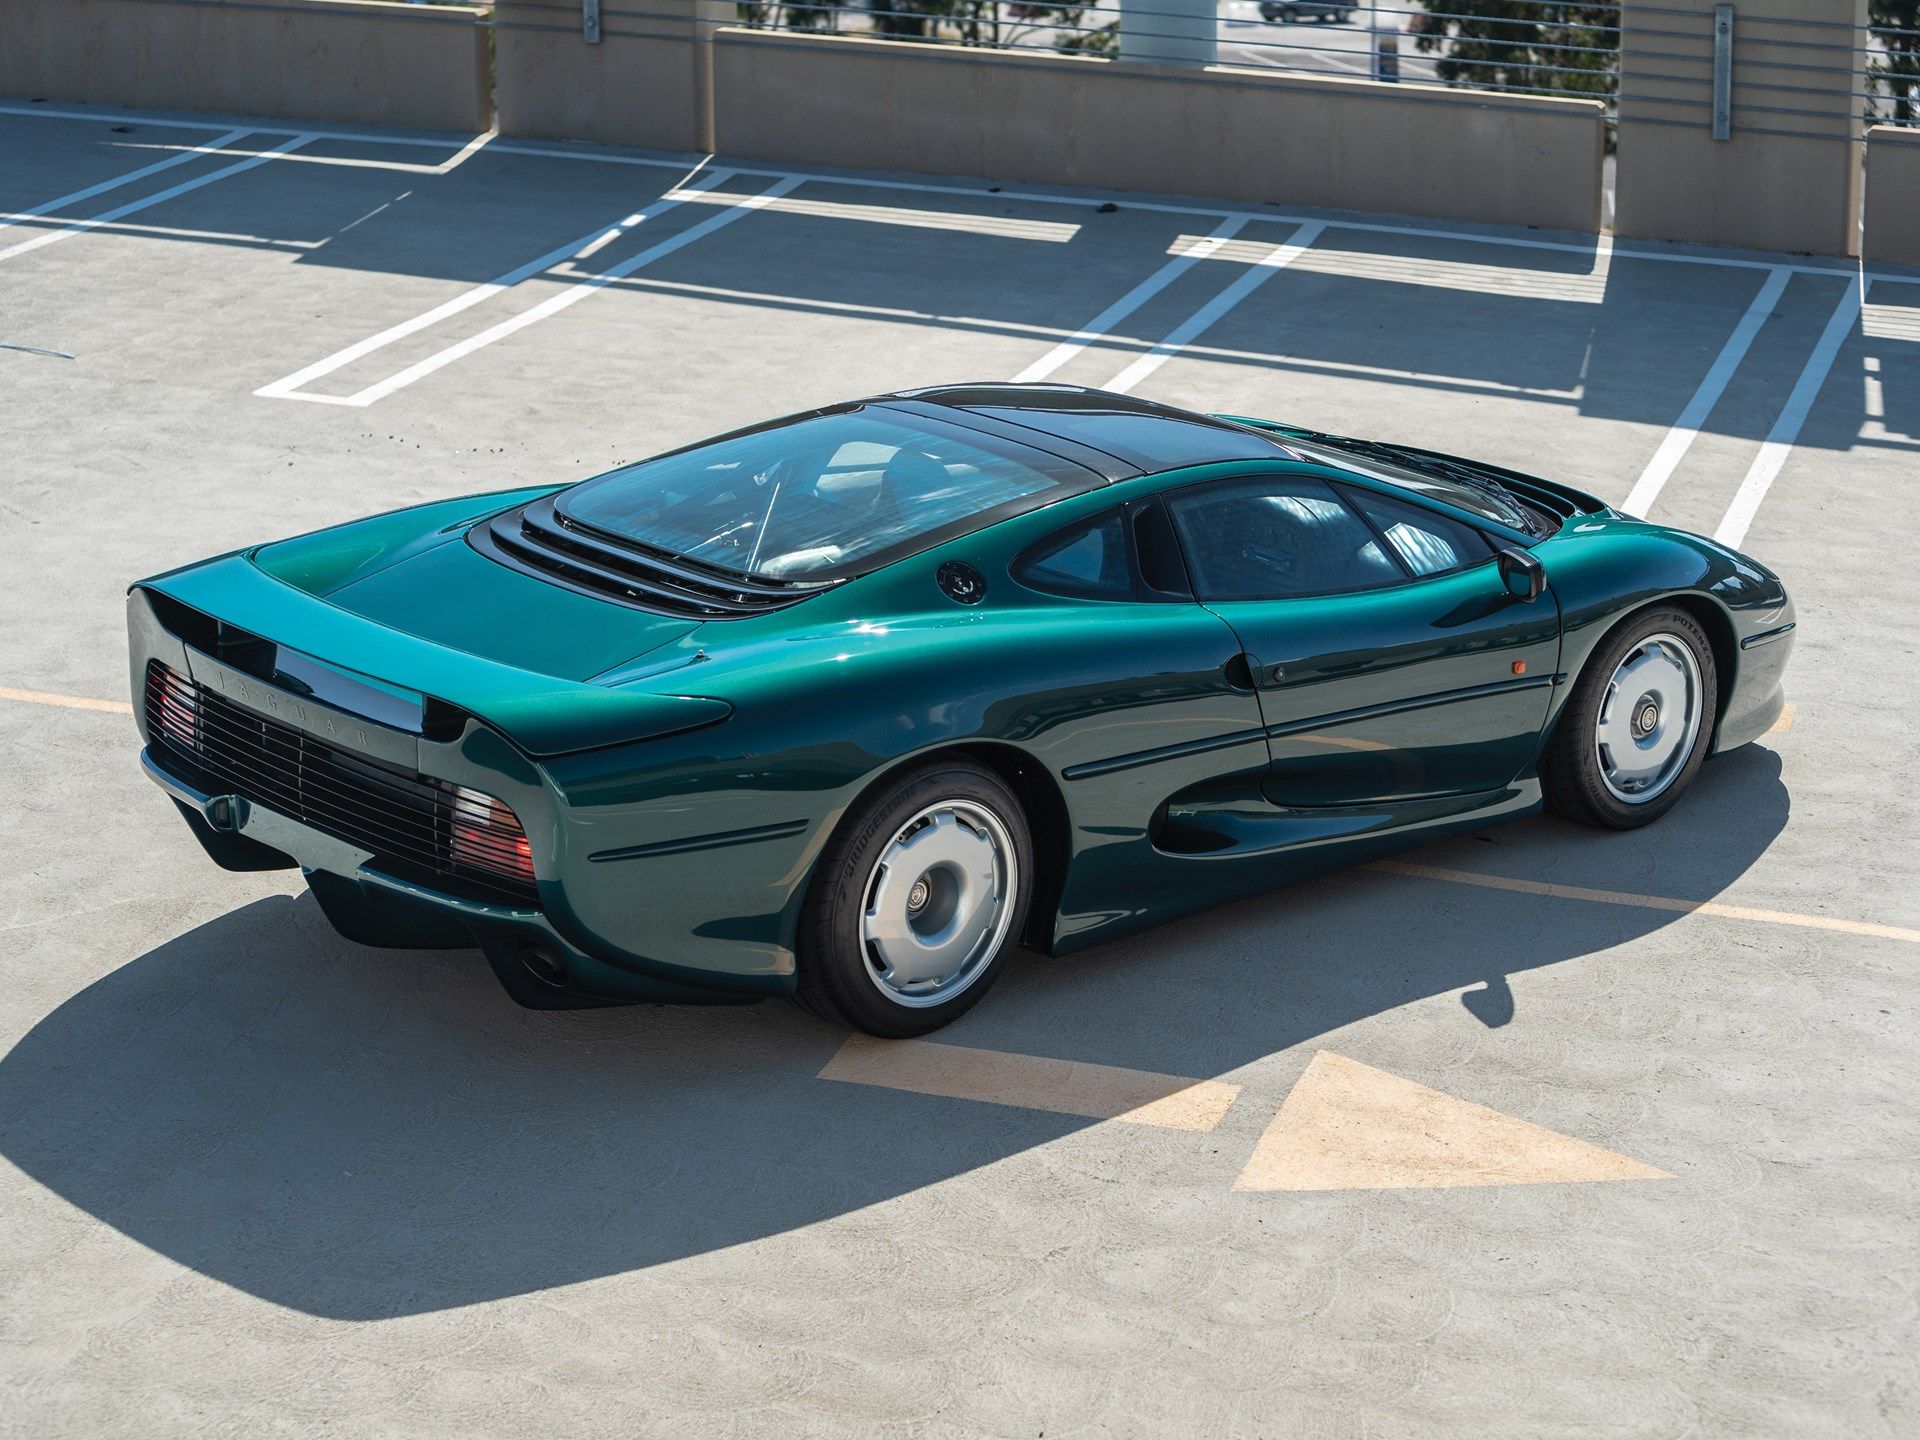 Download xj220 image for free